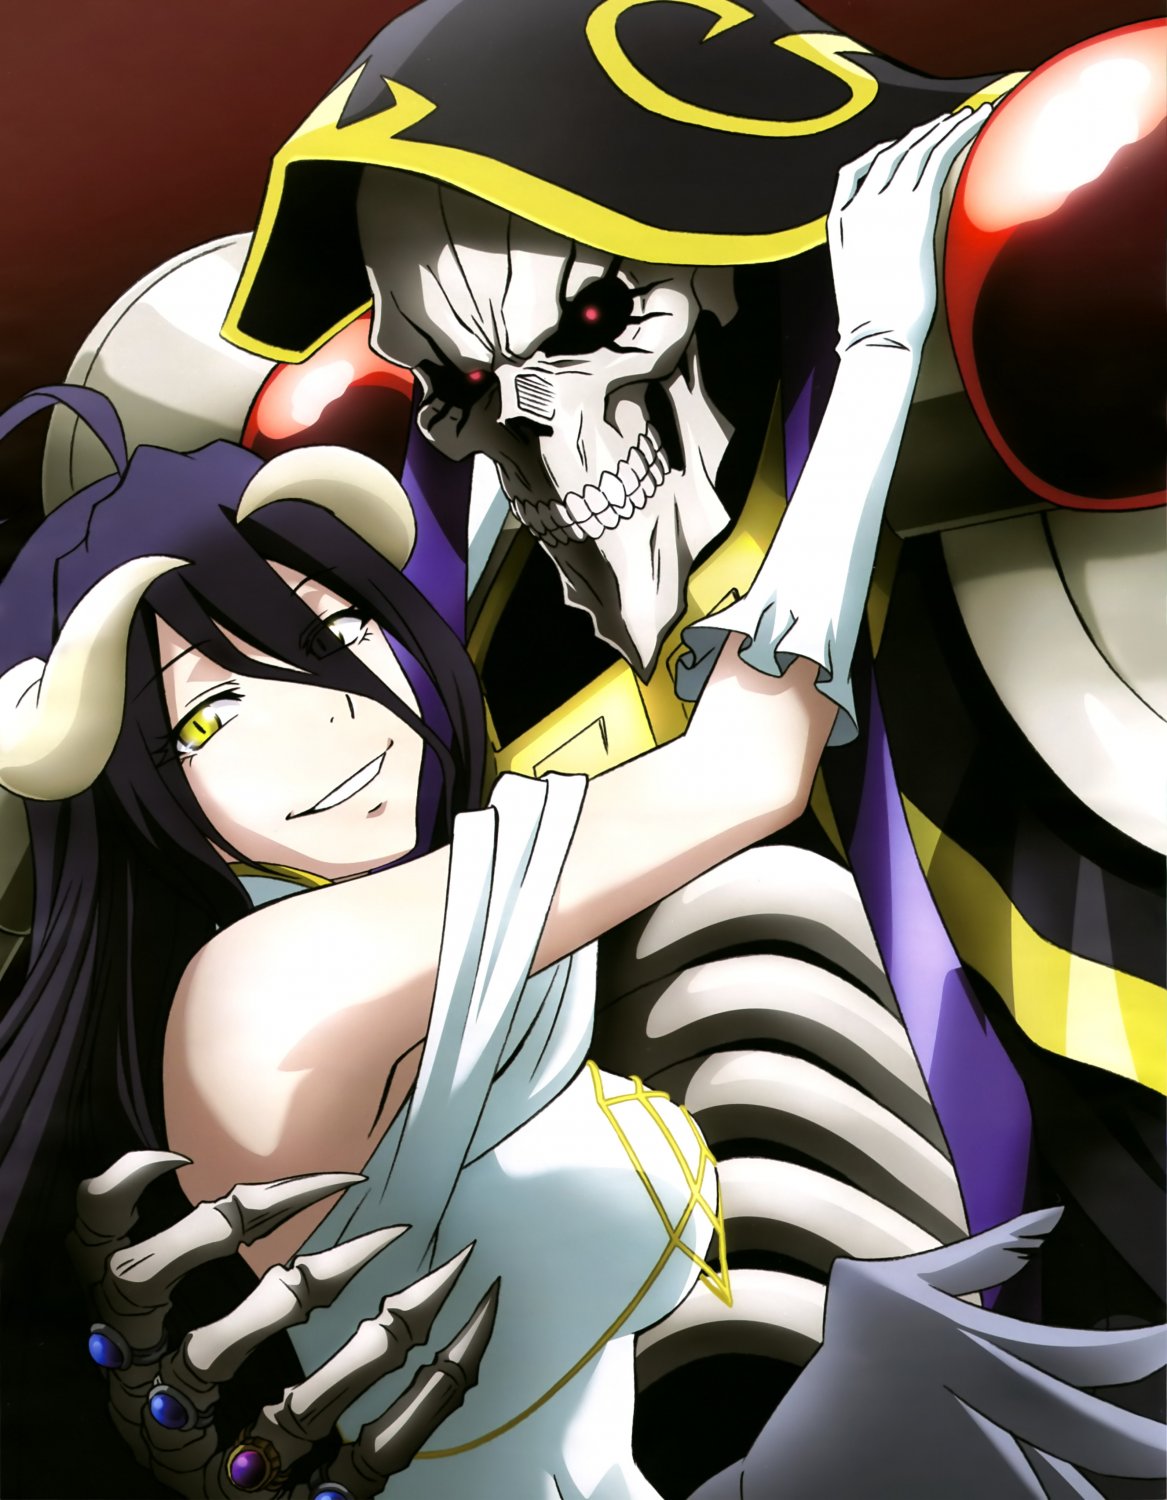 ANIME POSTER 12x18 OVERLORD 724575 Ainz Ooal Gown Albedo.